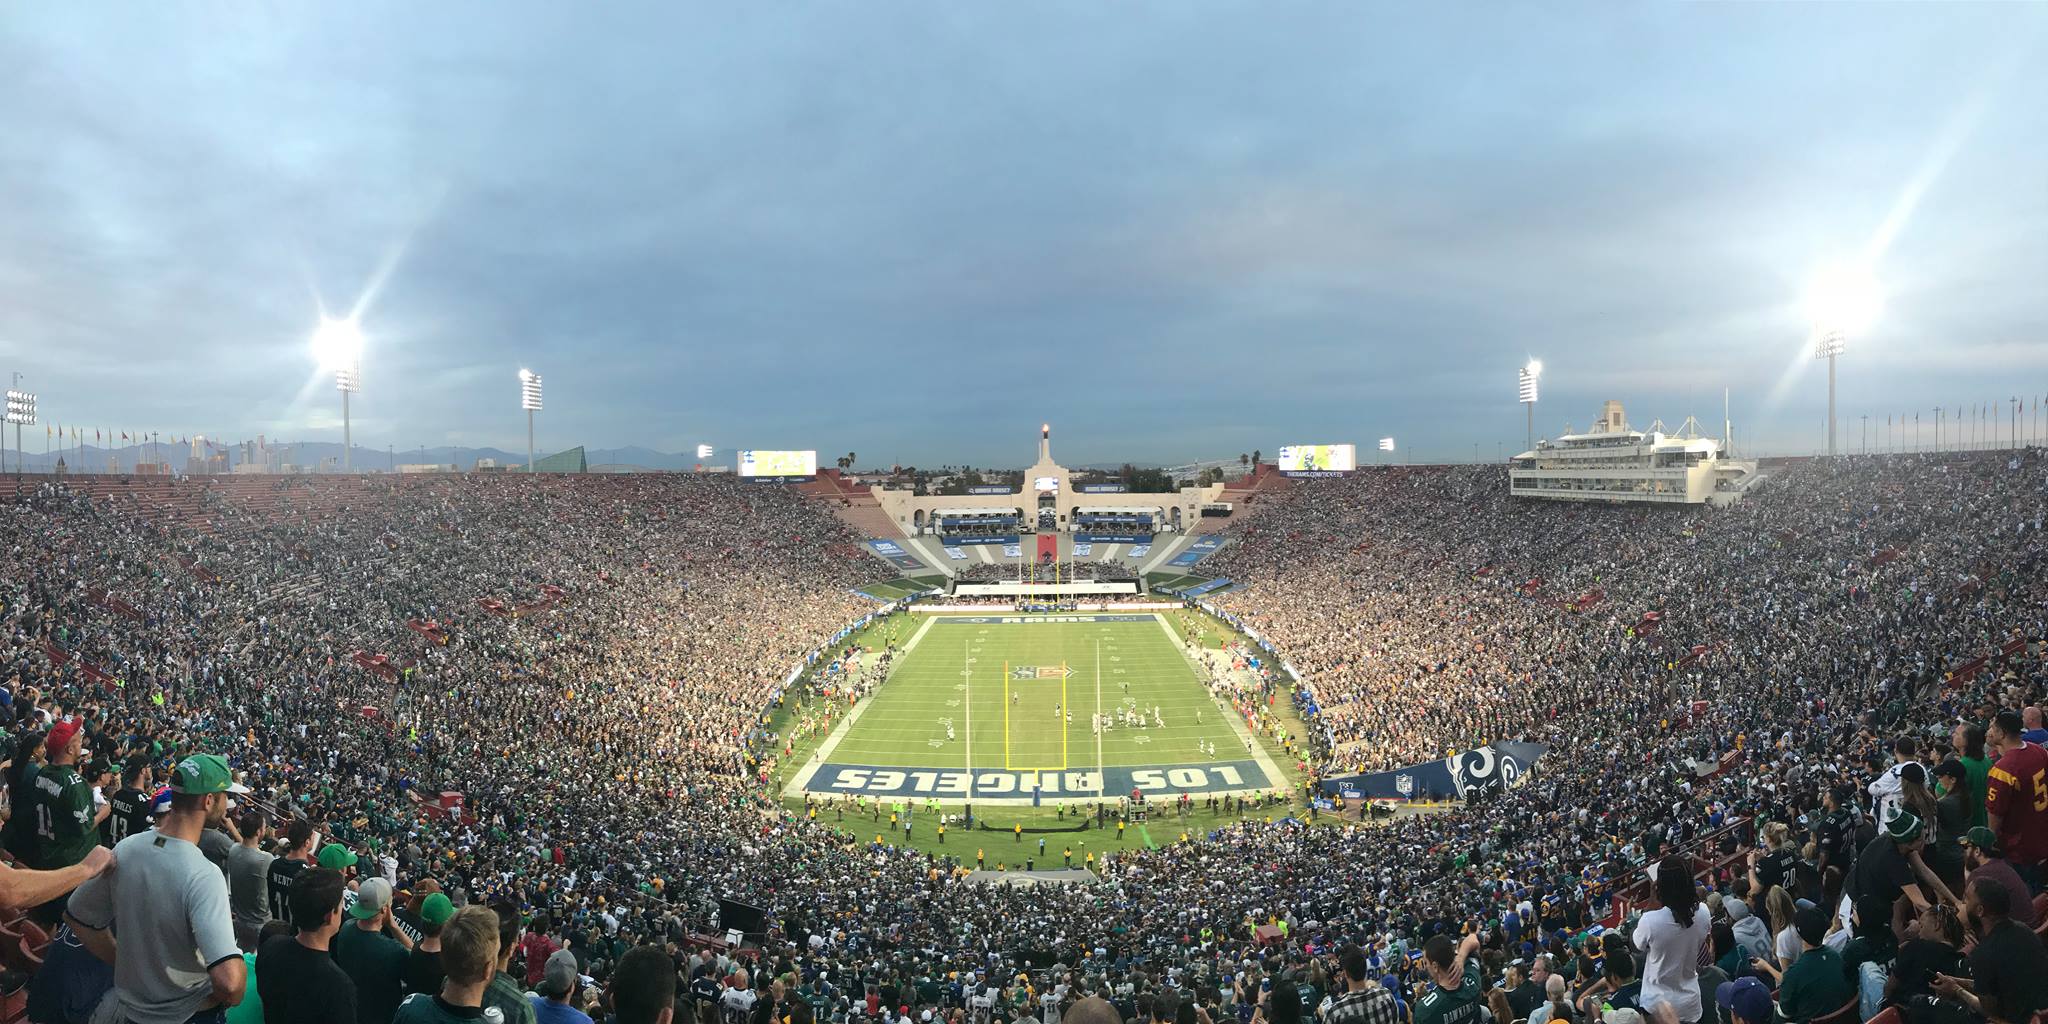 NFL Playoffs Promise Strong Slate of Stadiums - Football Stadium Digest2048 x 1024